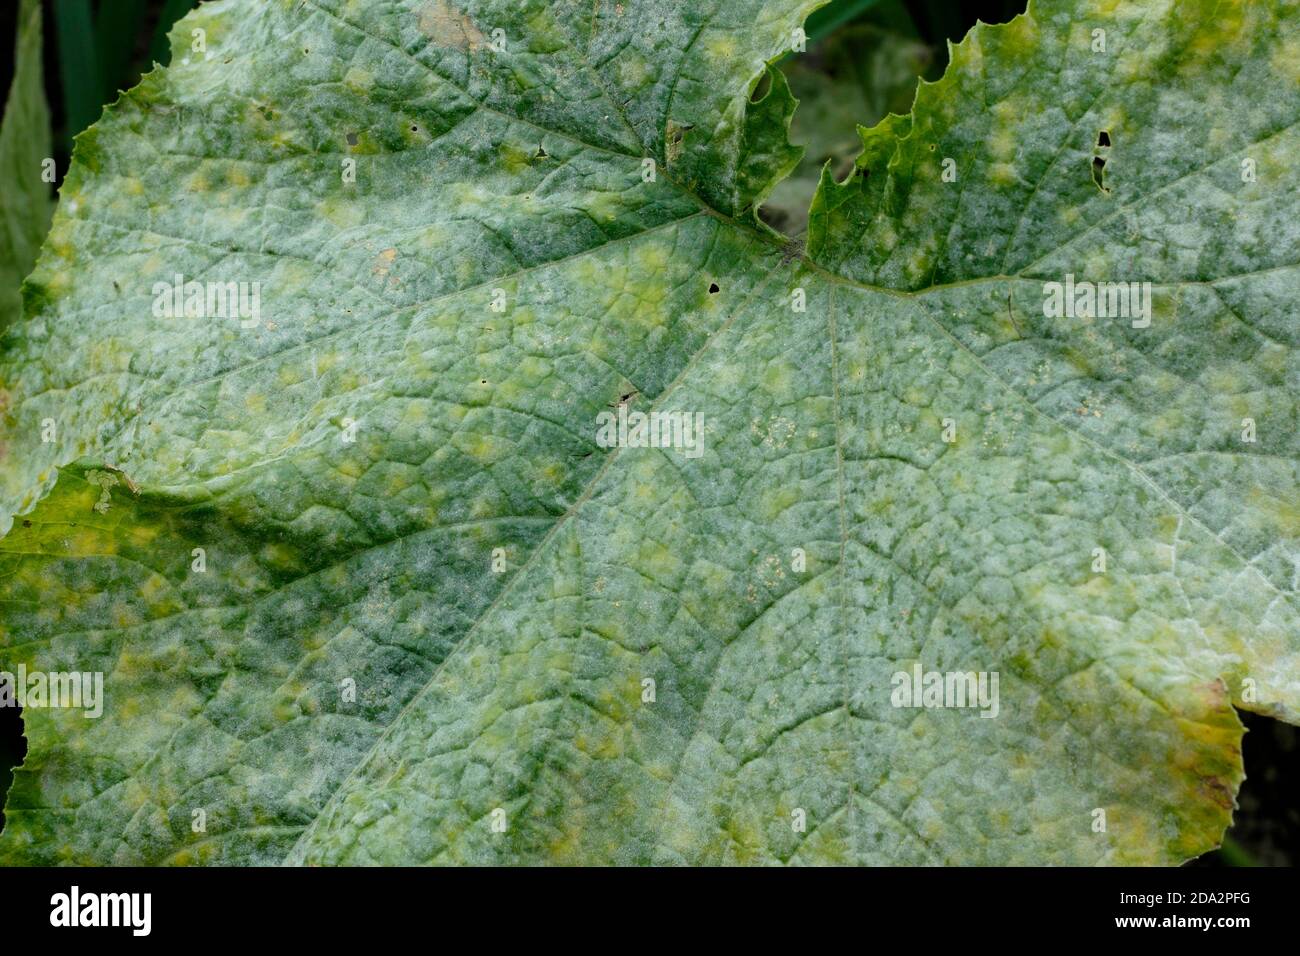 Cucurbita pepo.  Powdery mildew fungal disease on the leaves of a  courgette plant. UK Stock Photo